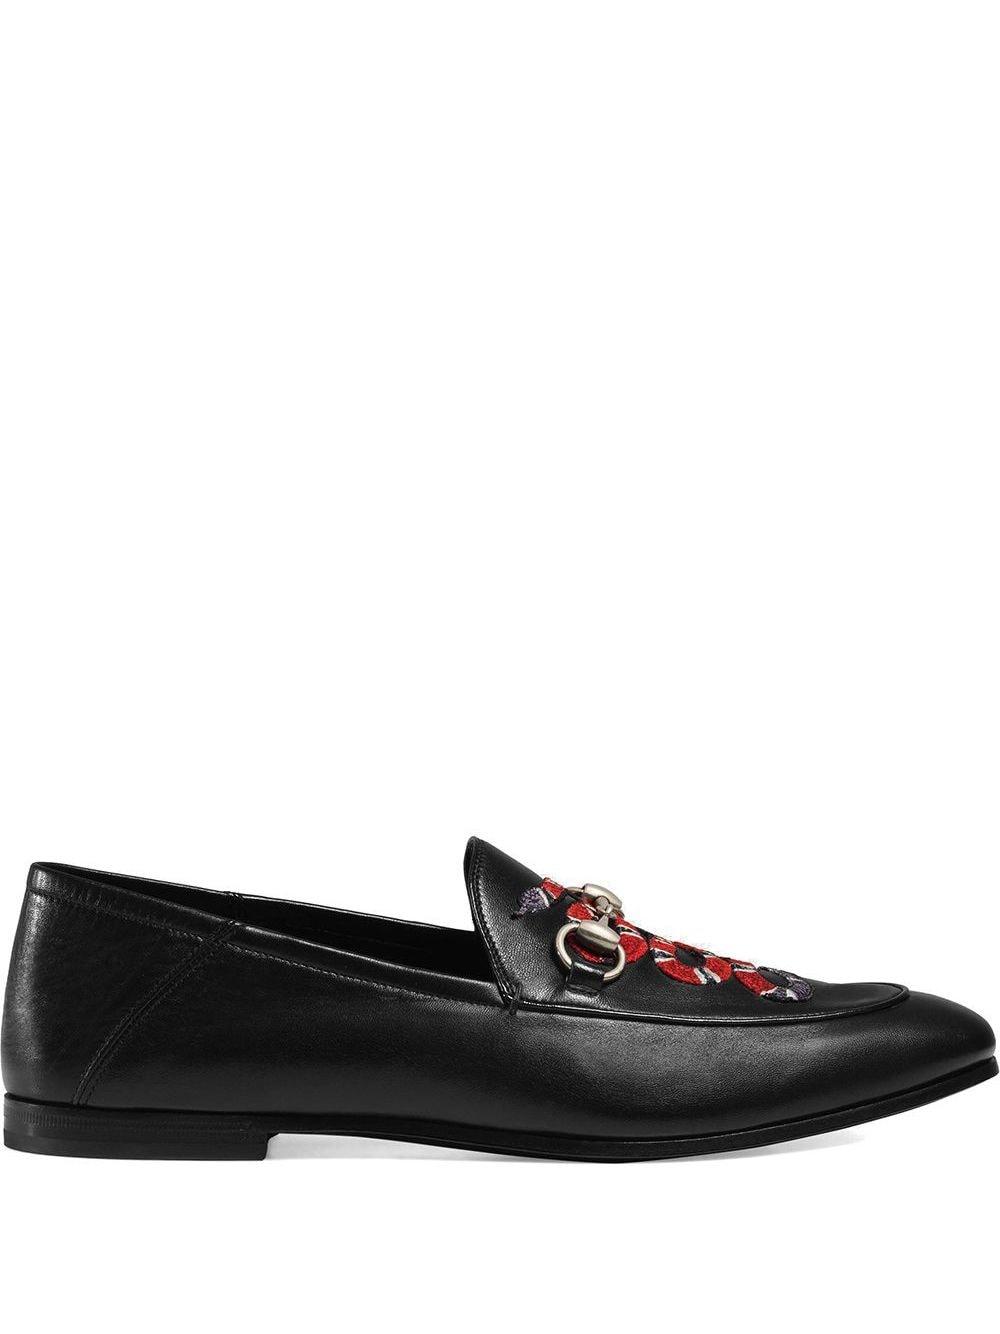 Gucci Kingsnake Leather Loafers in Black for Men | Lyst